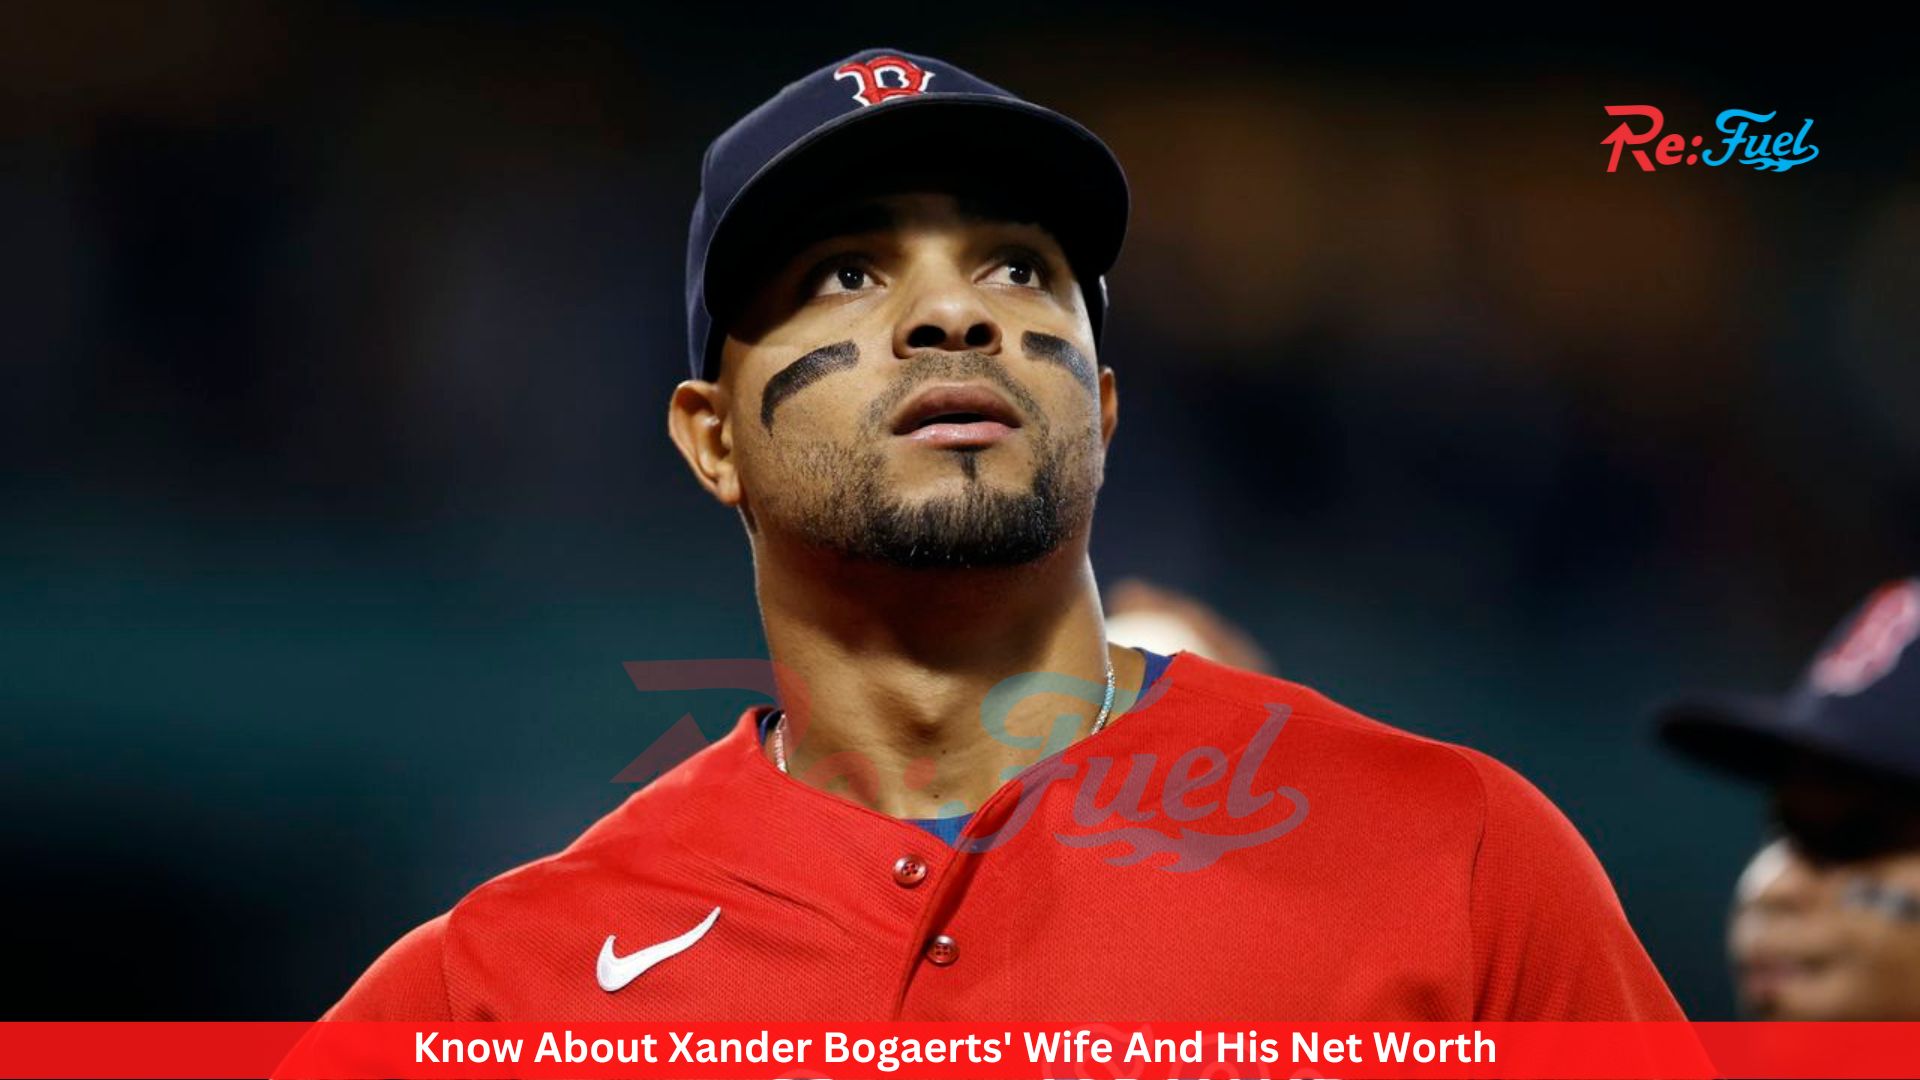 Know About Xander Bogaerts' Wife And His Net Worth